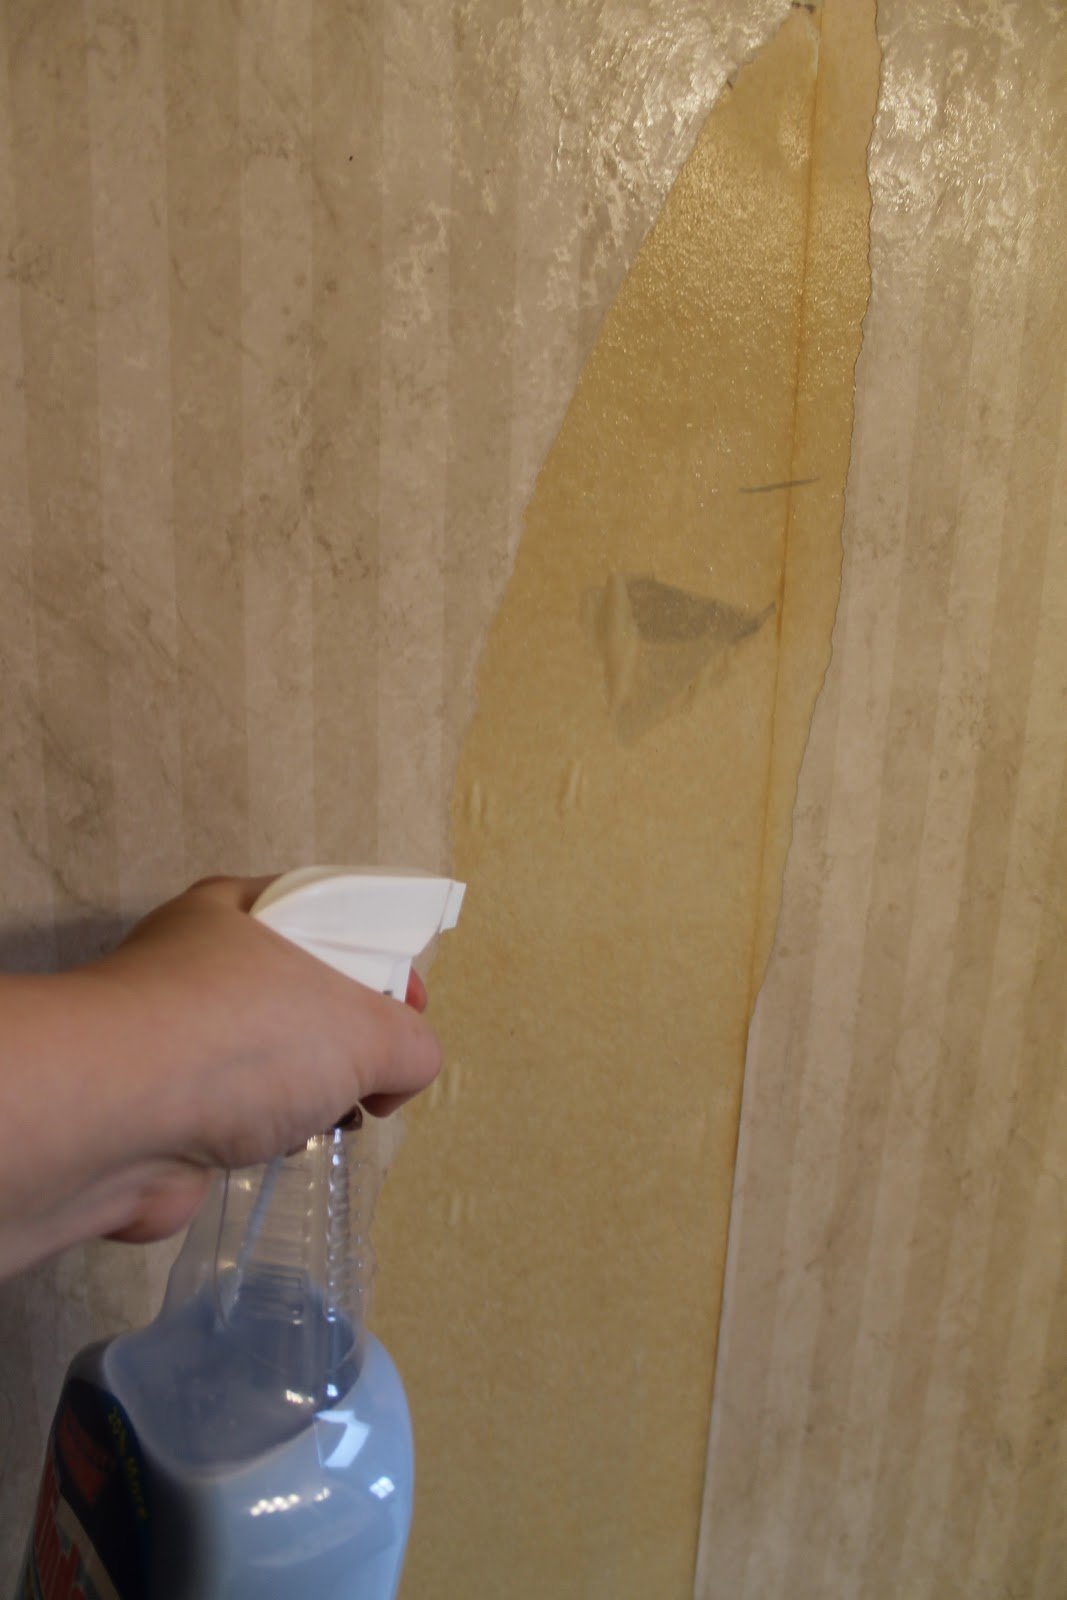 50+] Removing Wallpaper with Vinegar on